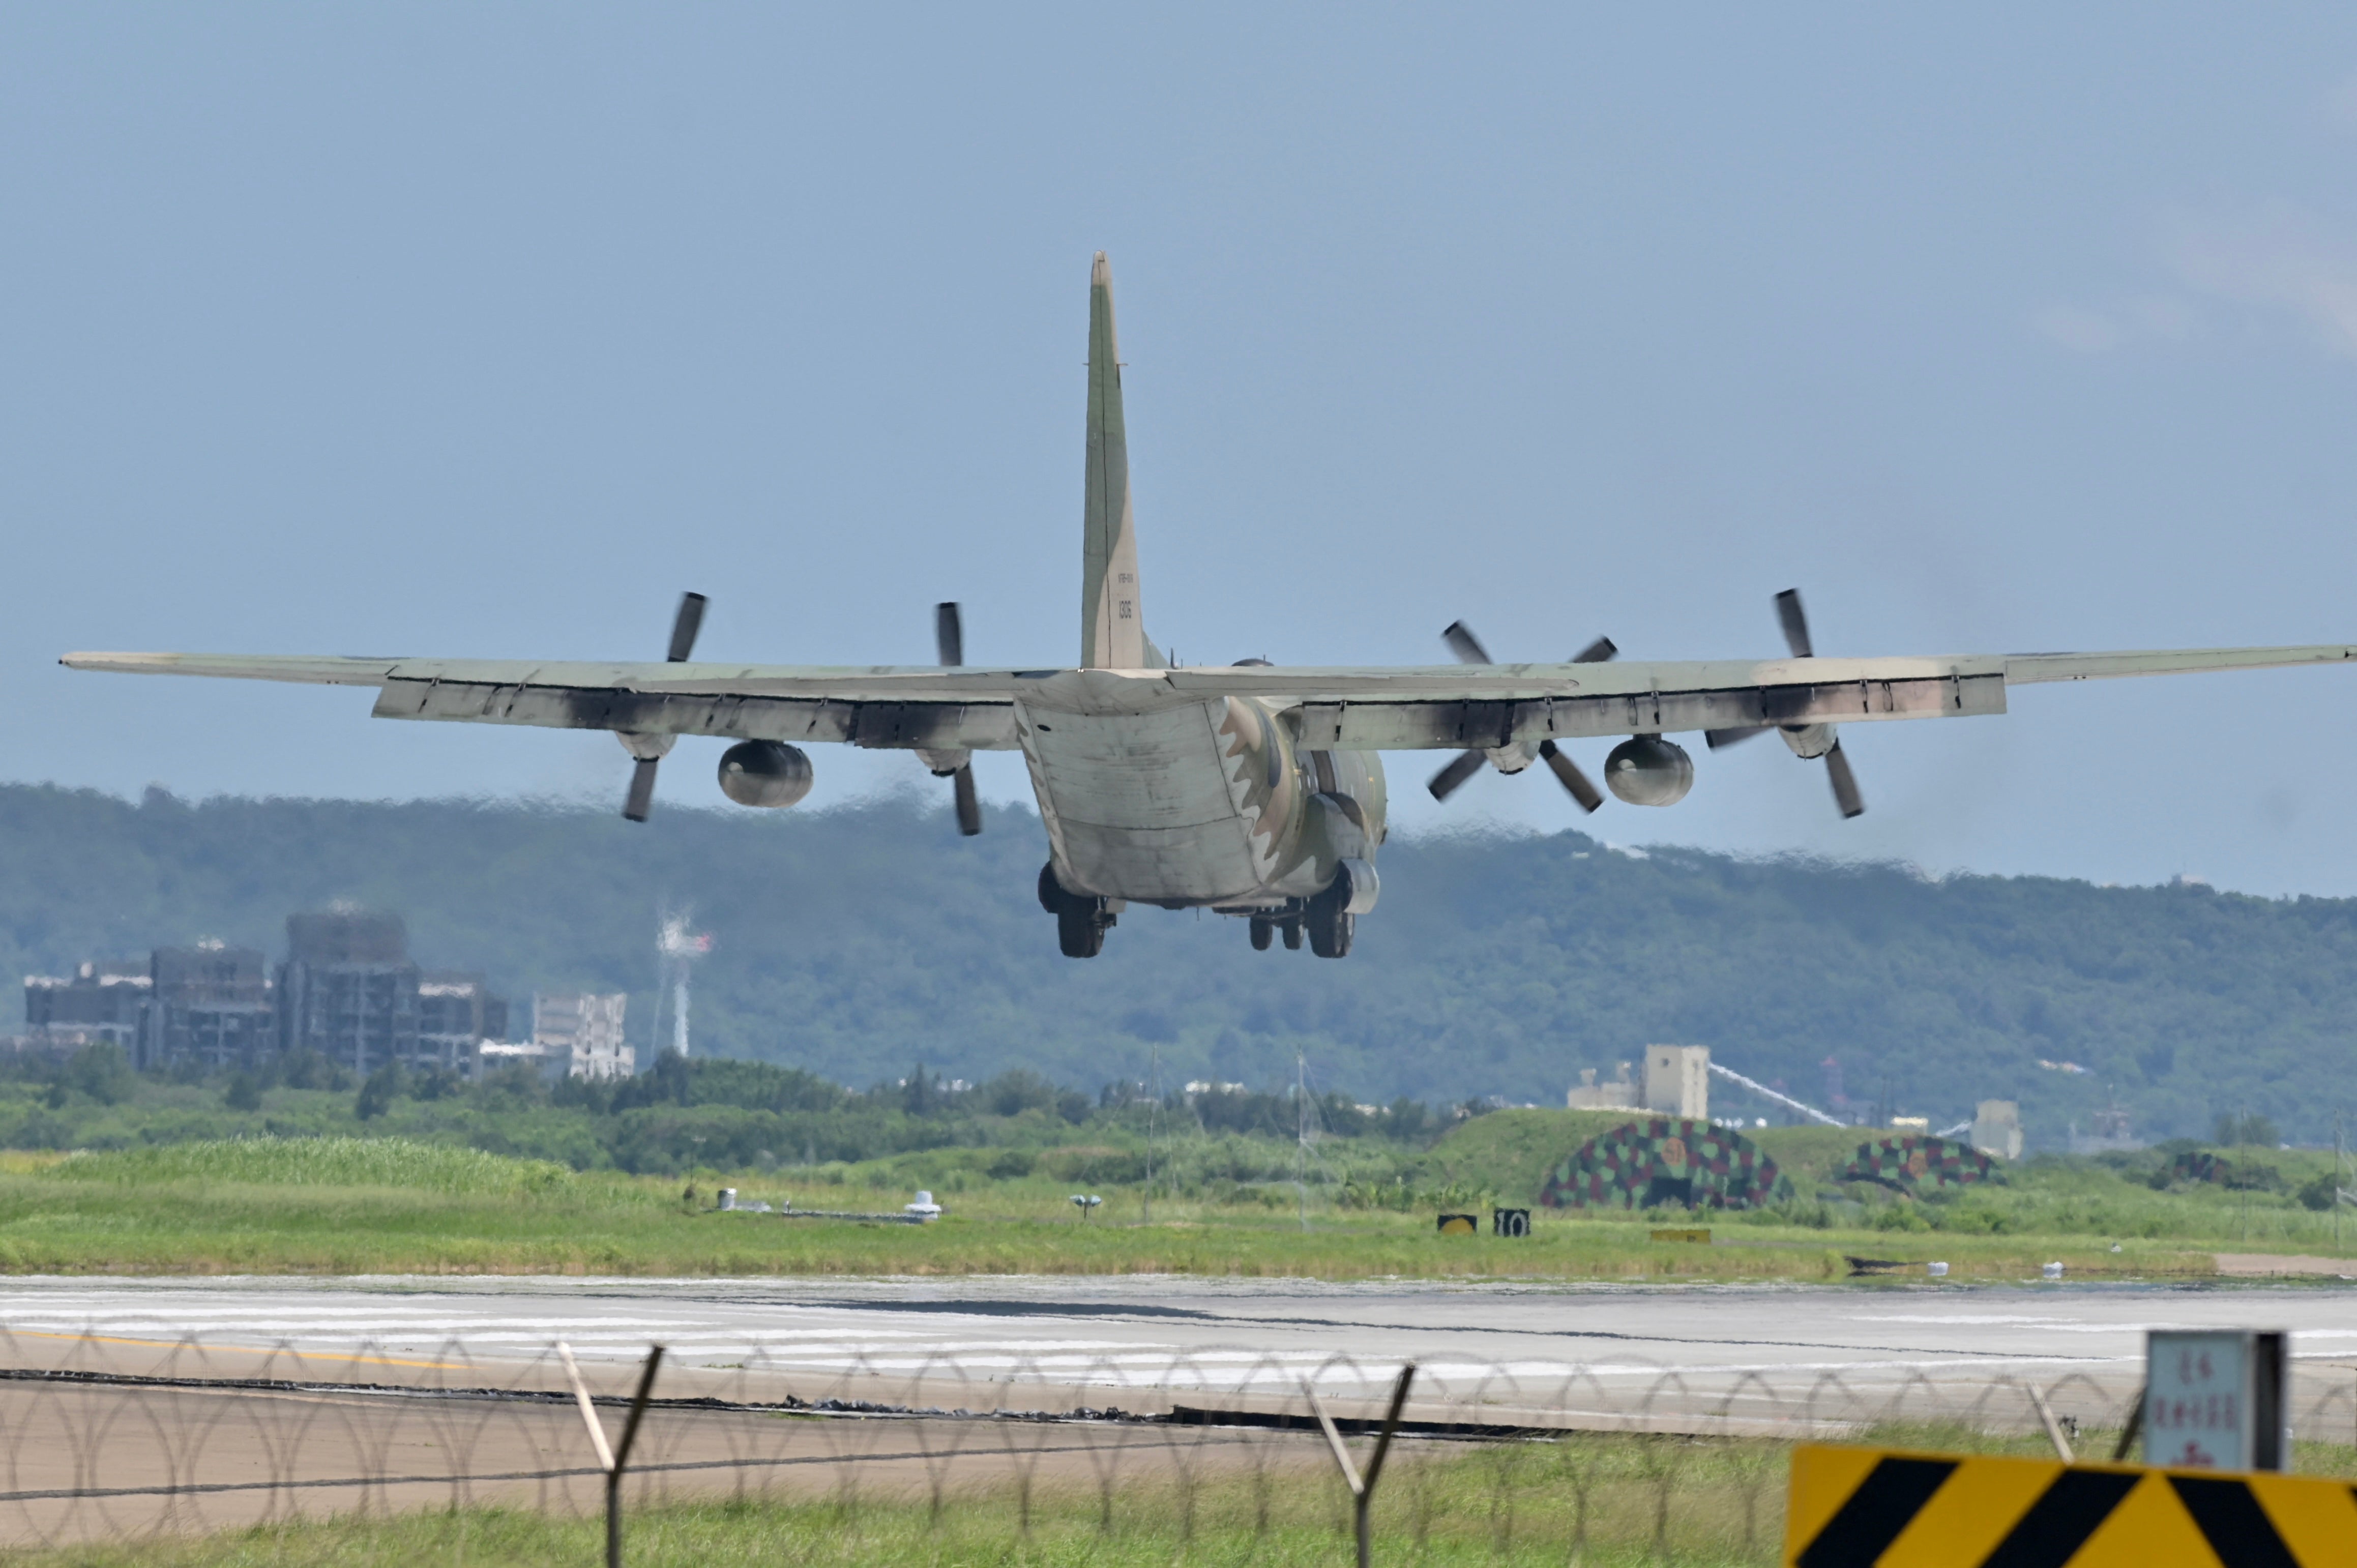 A US-made C-130 aircraft prepares to land on a runway at the Hsinchu Air Base in Hsinchu on 5 August 2022